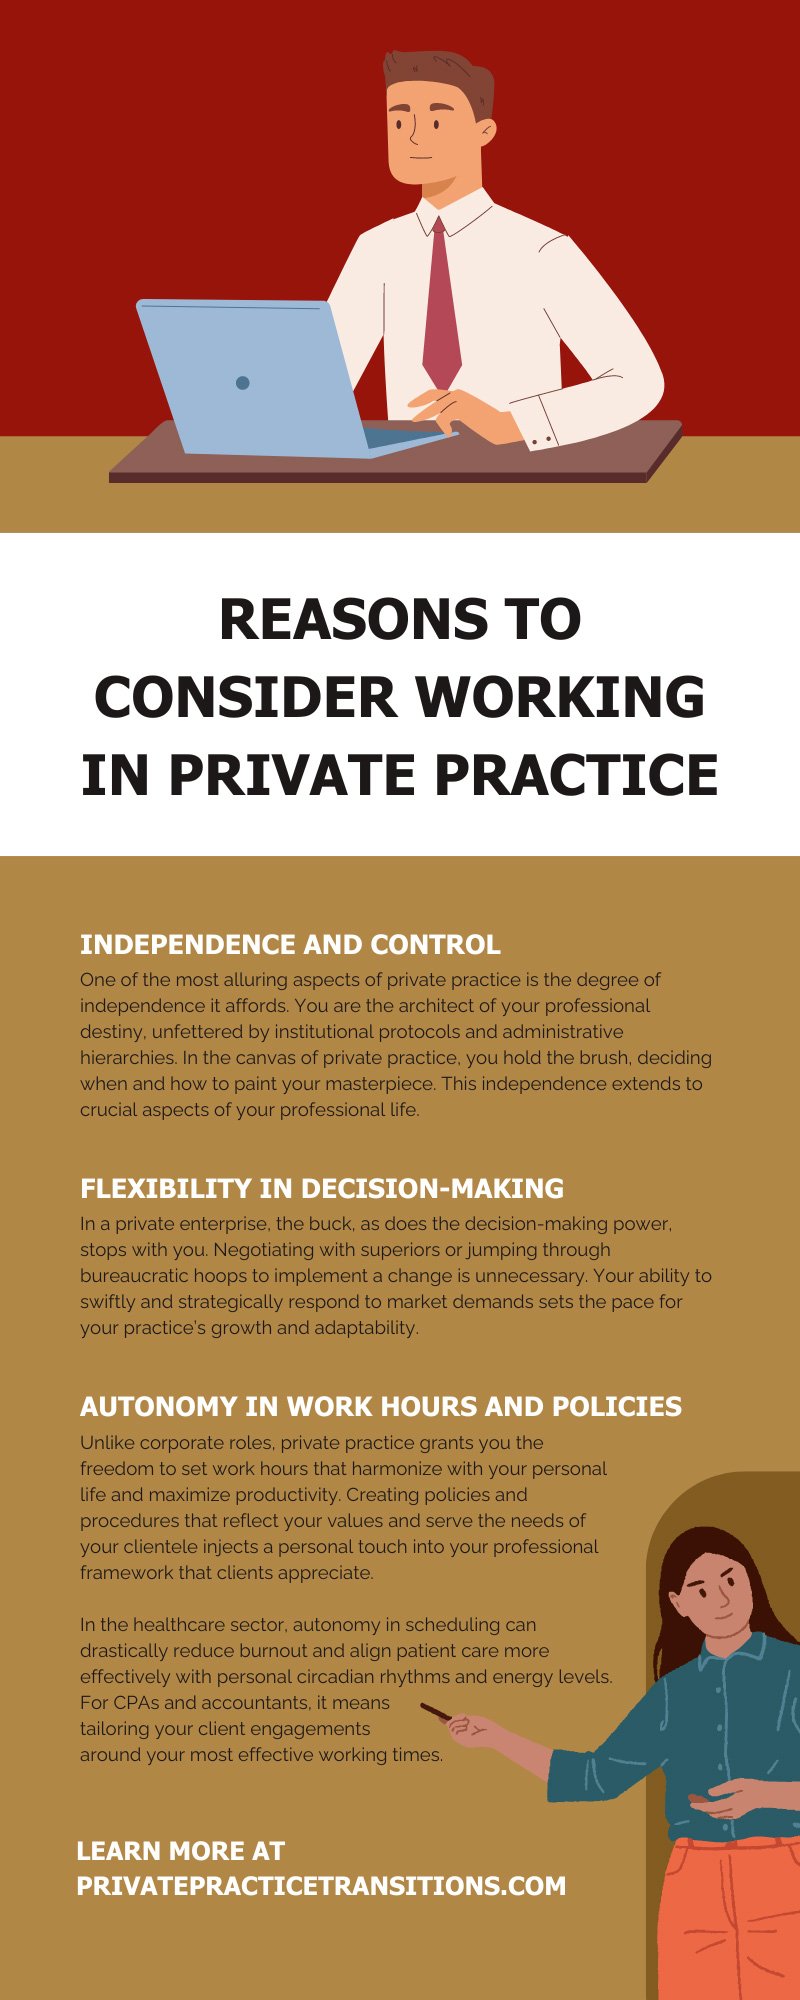 5 Reasons To Consider Working in Private Practice